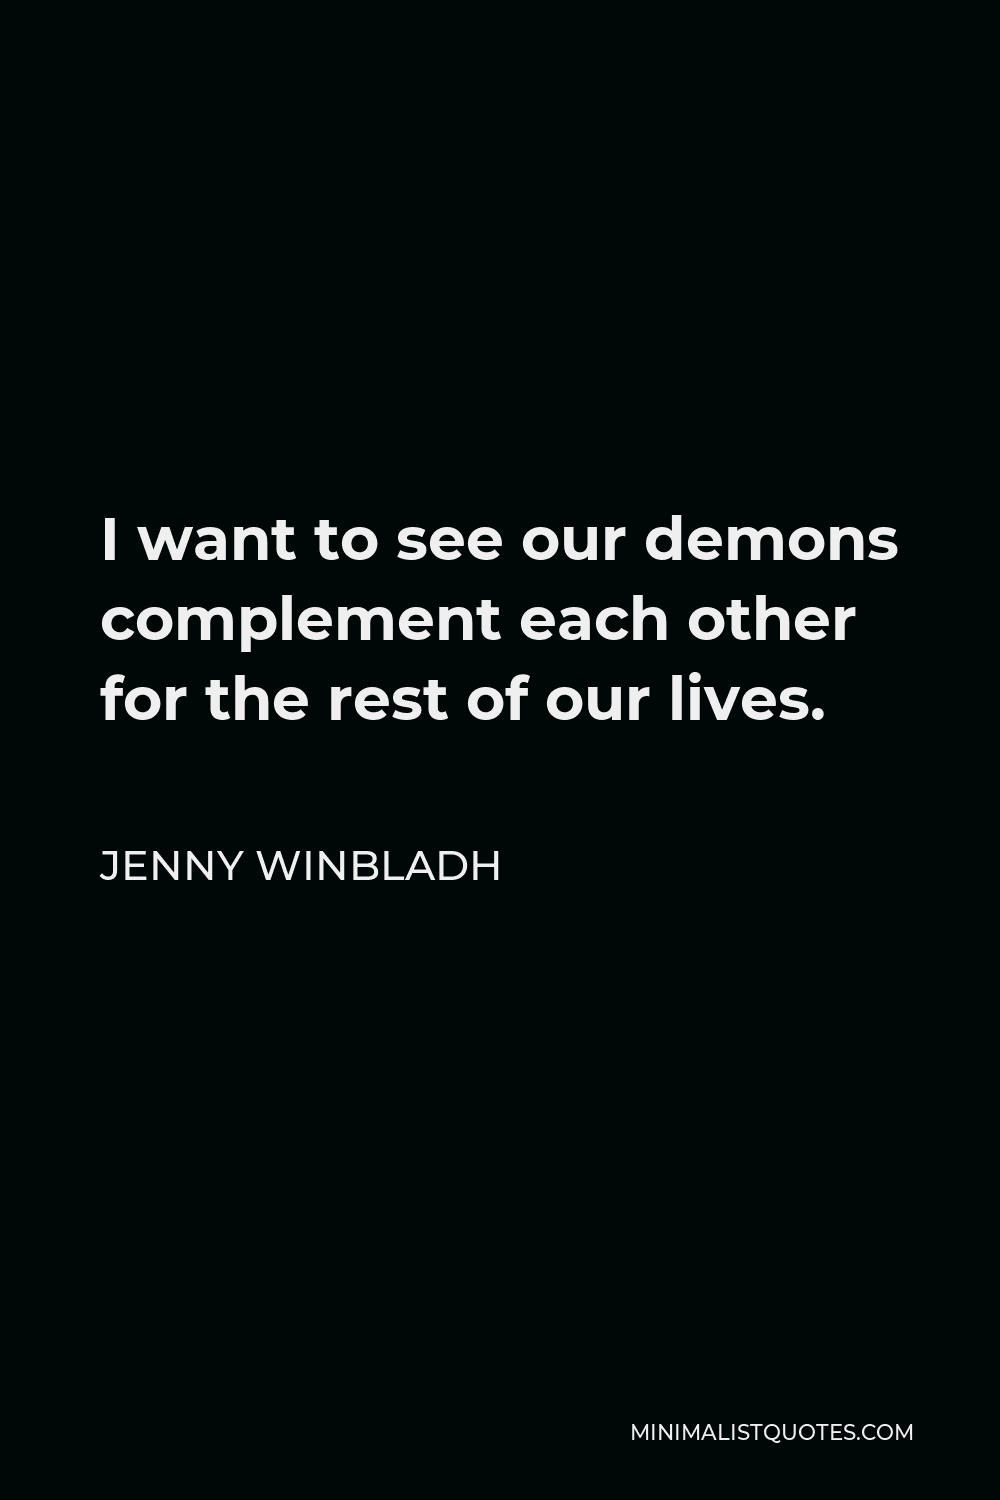 Jenny Winbladh Quote - I want to see our demons complement each other for the rest of our lives.